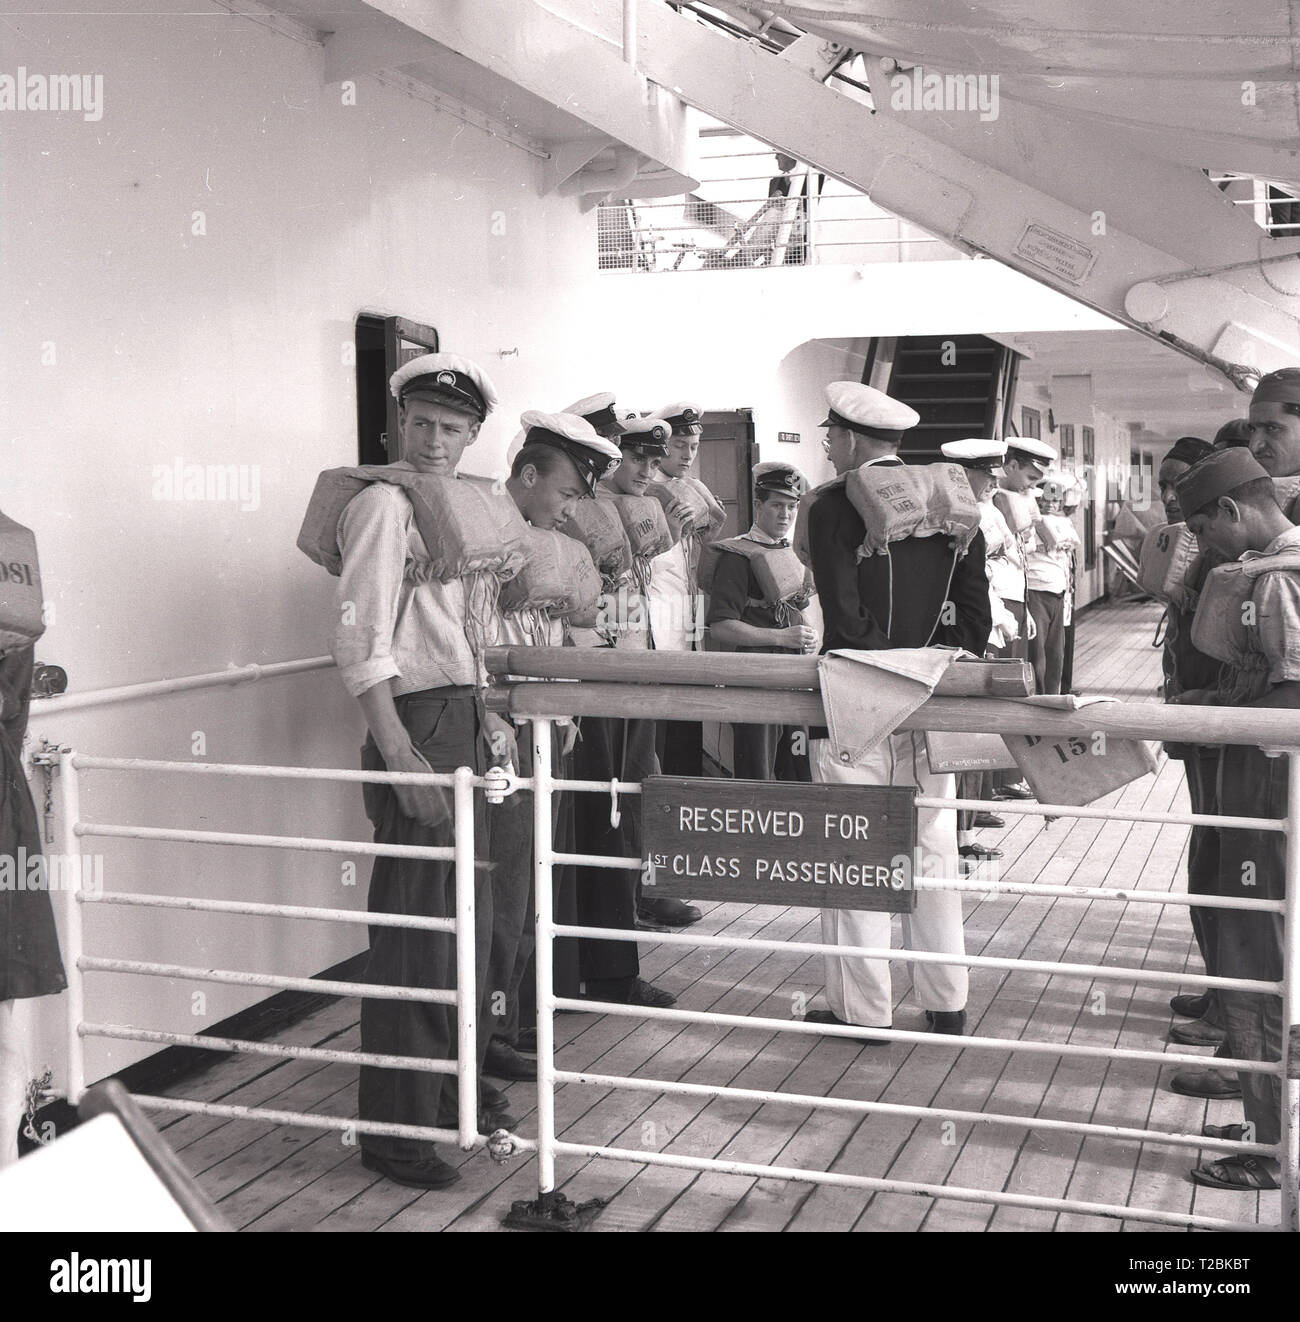 1950s, historical, a ship's crew on the deck of the P & O SS Chusan steamship preparing for a safety exercise or drill with their lifejackets, in the area reserved for 1st class passengers. An ocean liner built for P & O Orient lines travelling the India and the Far East, she was named after Chusan, a small island off China. Stock Photo